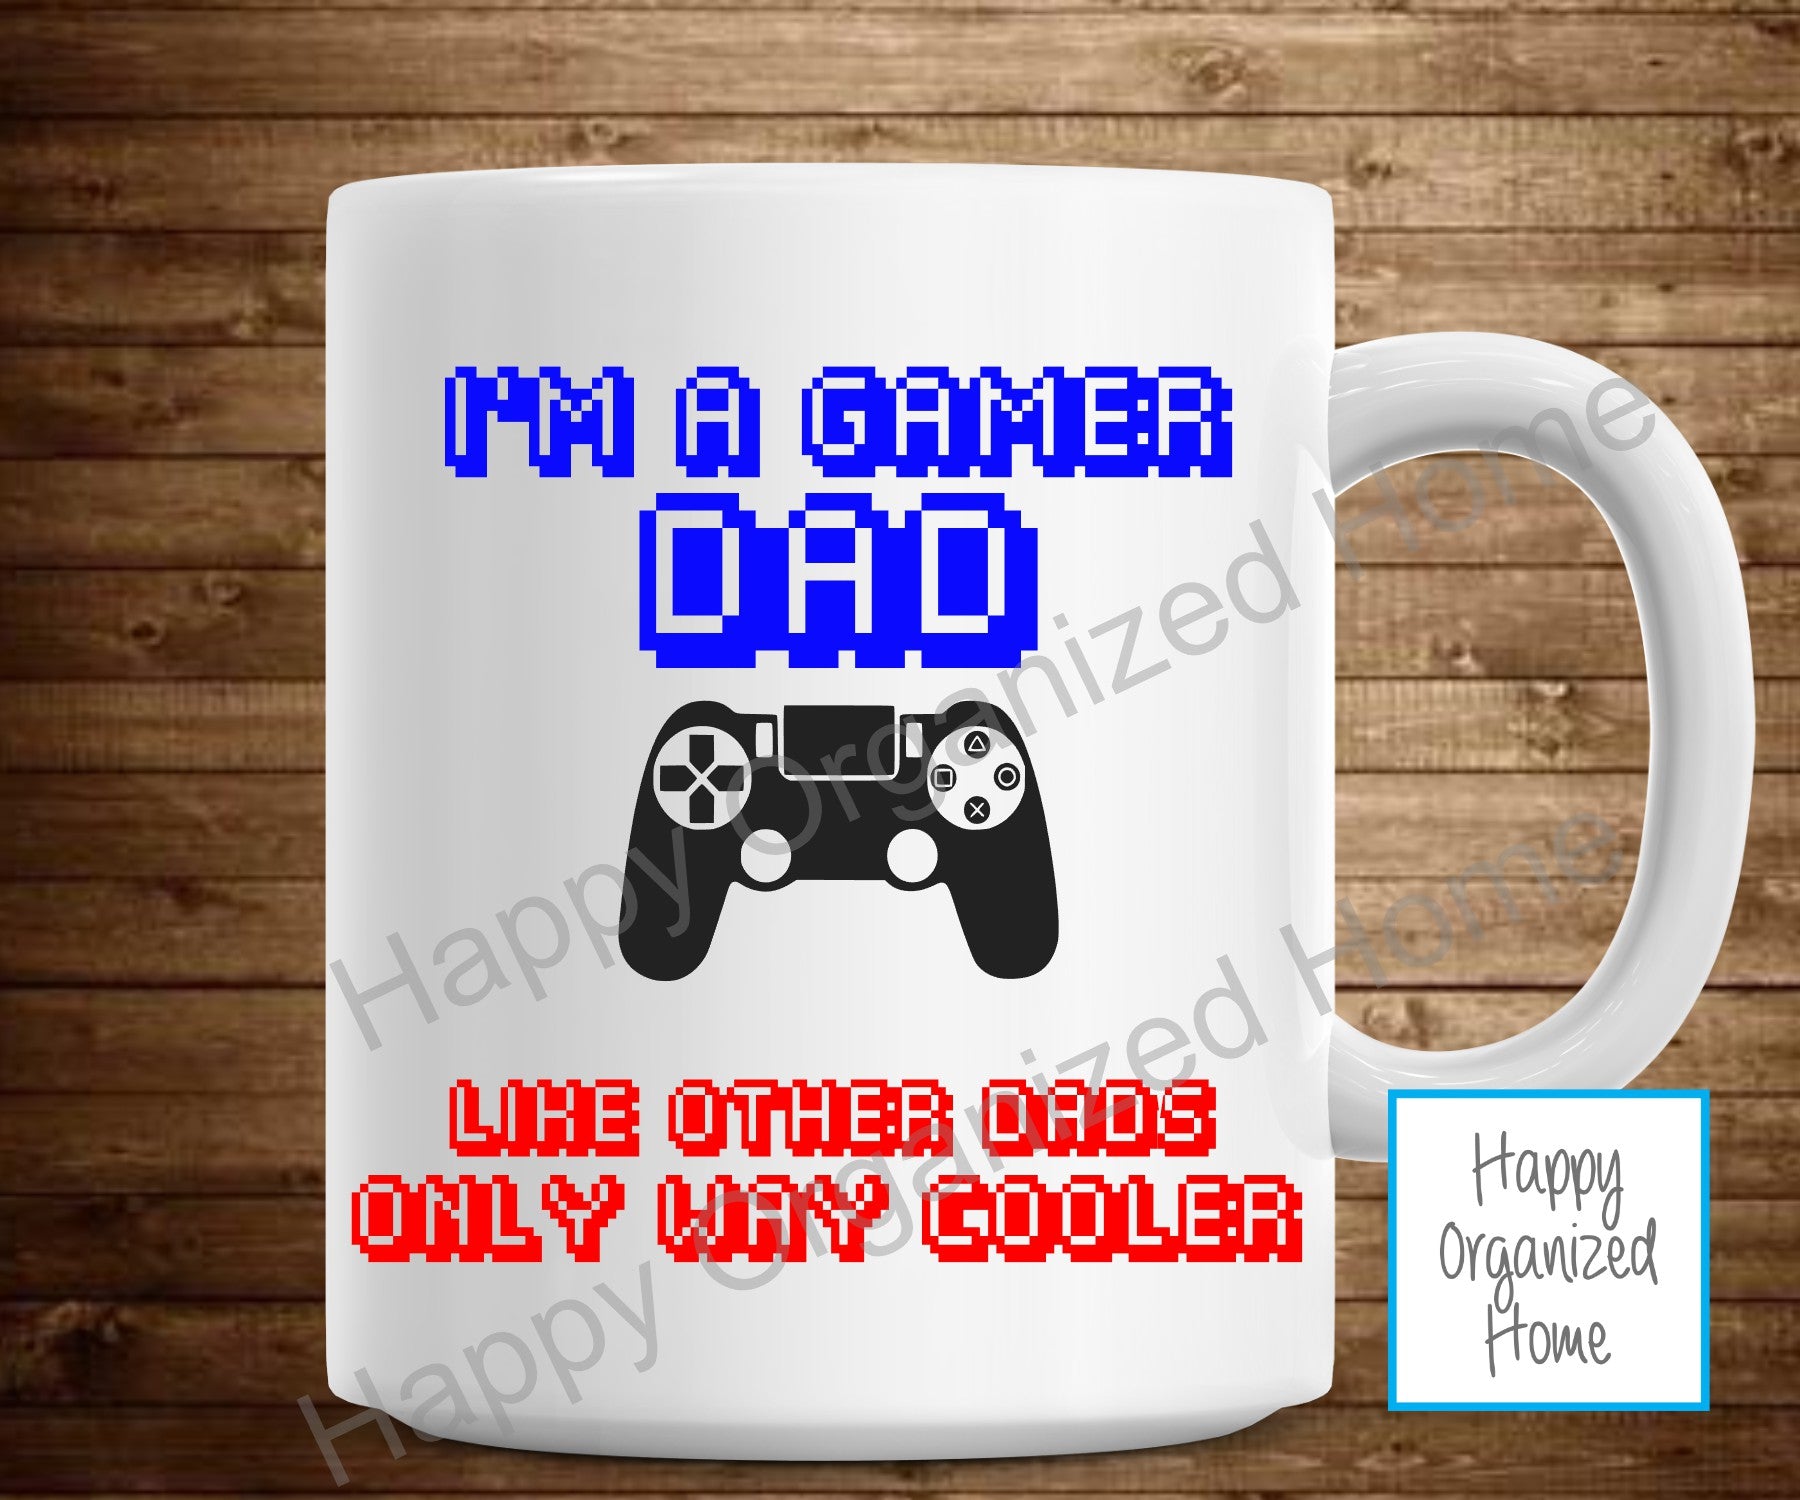 I'm a Gamer Dad. Like other Dads only way cooler